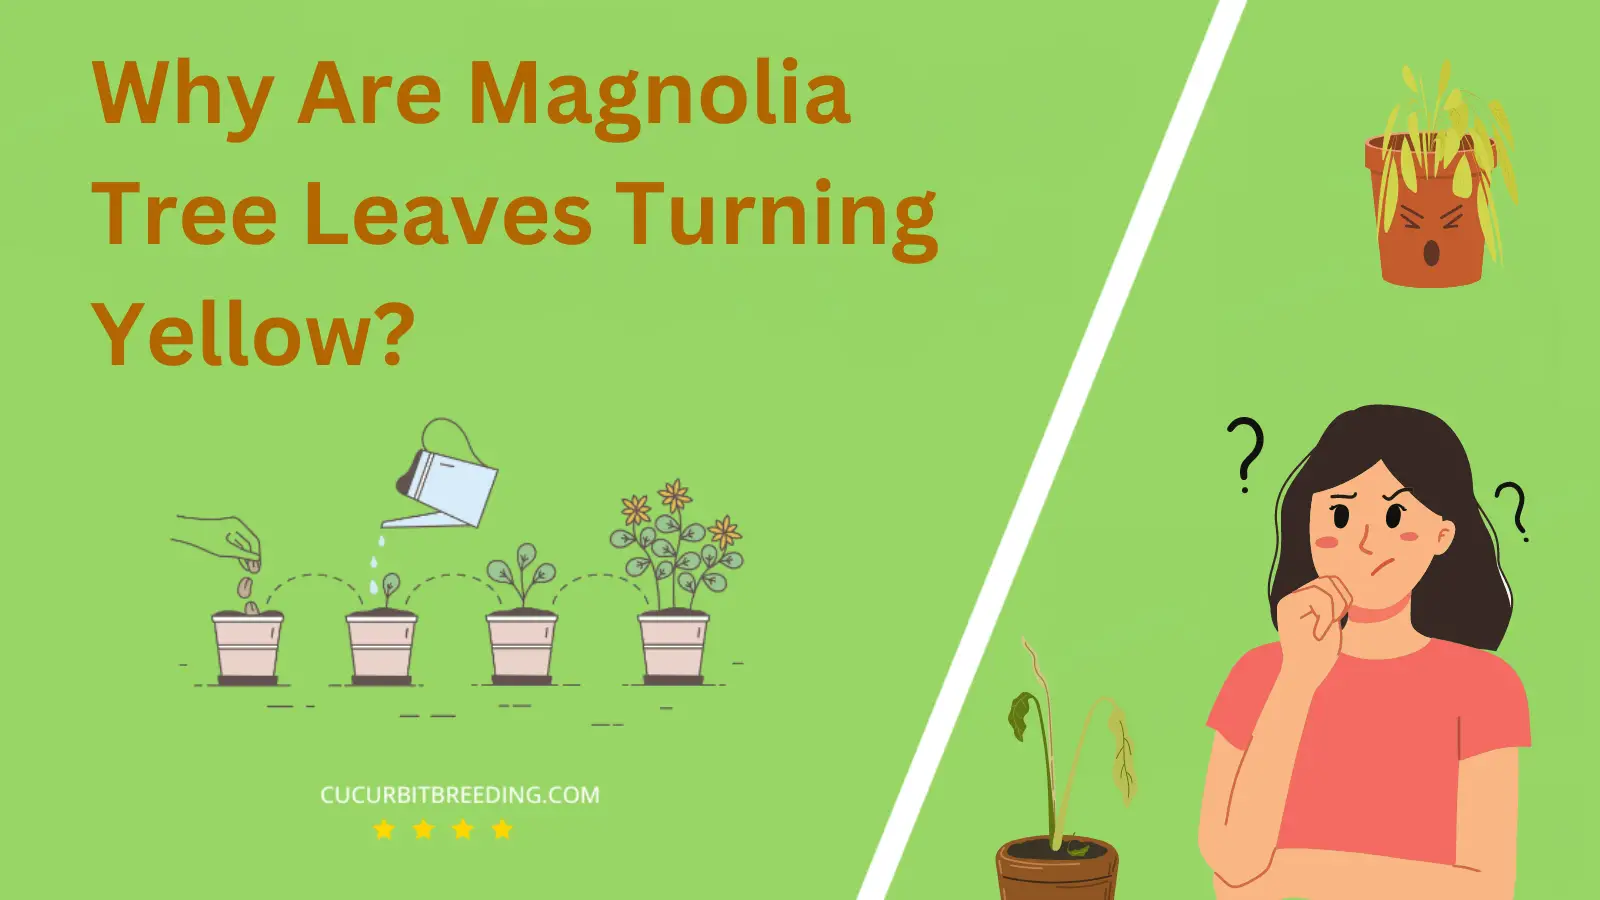 Why Are Magnolia Tree Leaves Turning Yellow